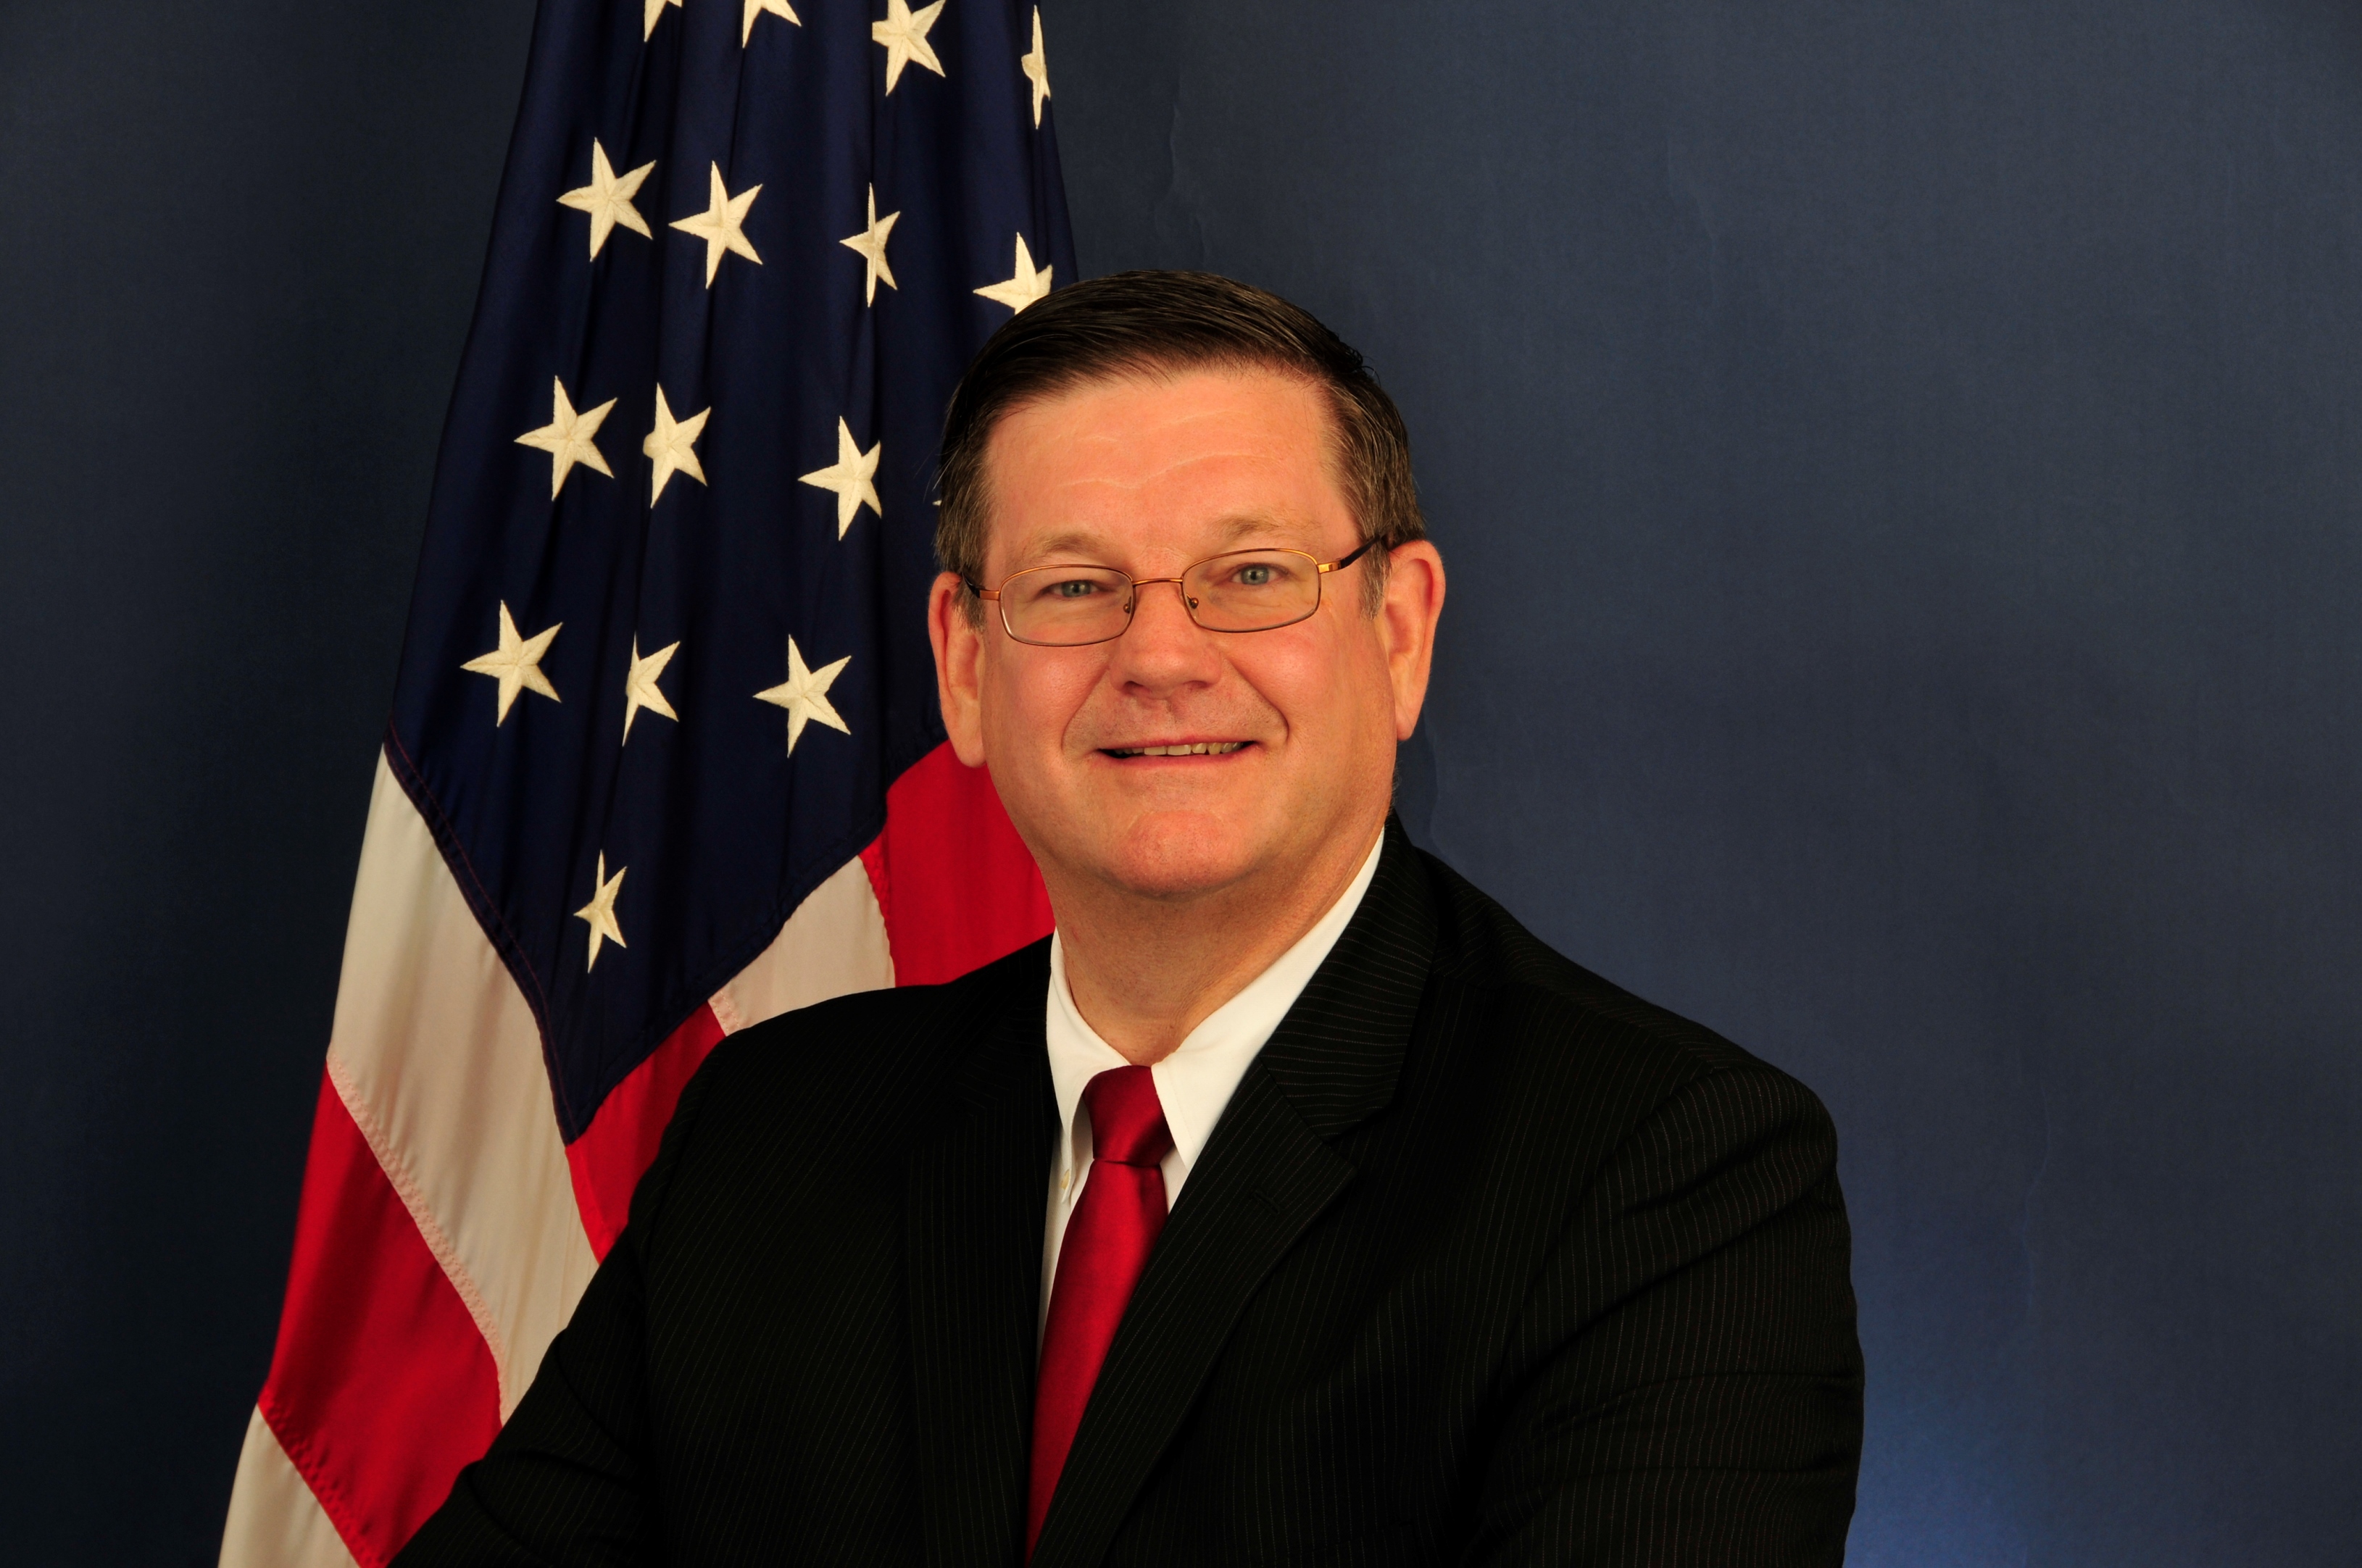 Chief Safety Officer and Assistant Administrator Jack Van Steenburg